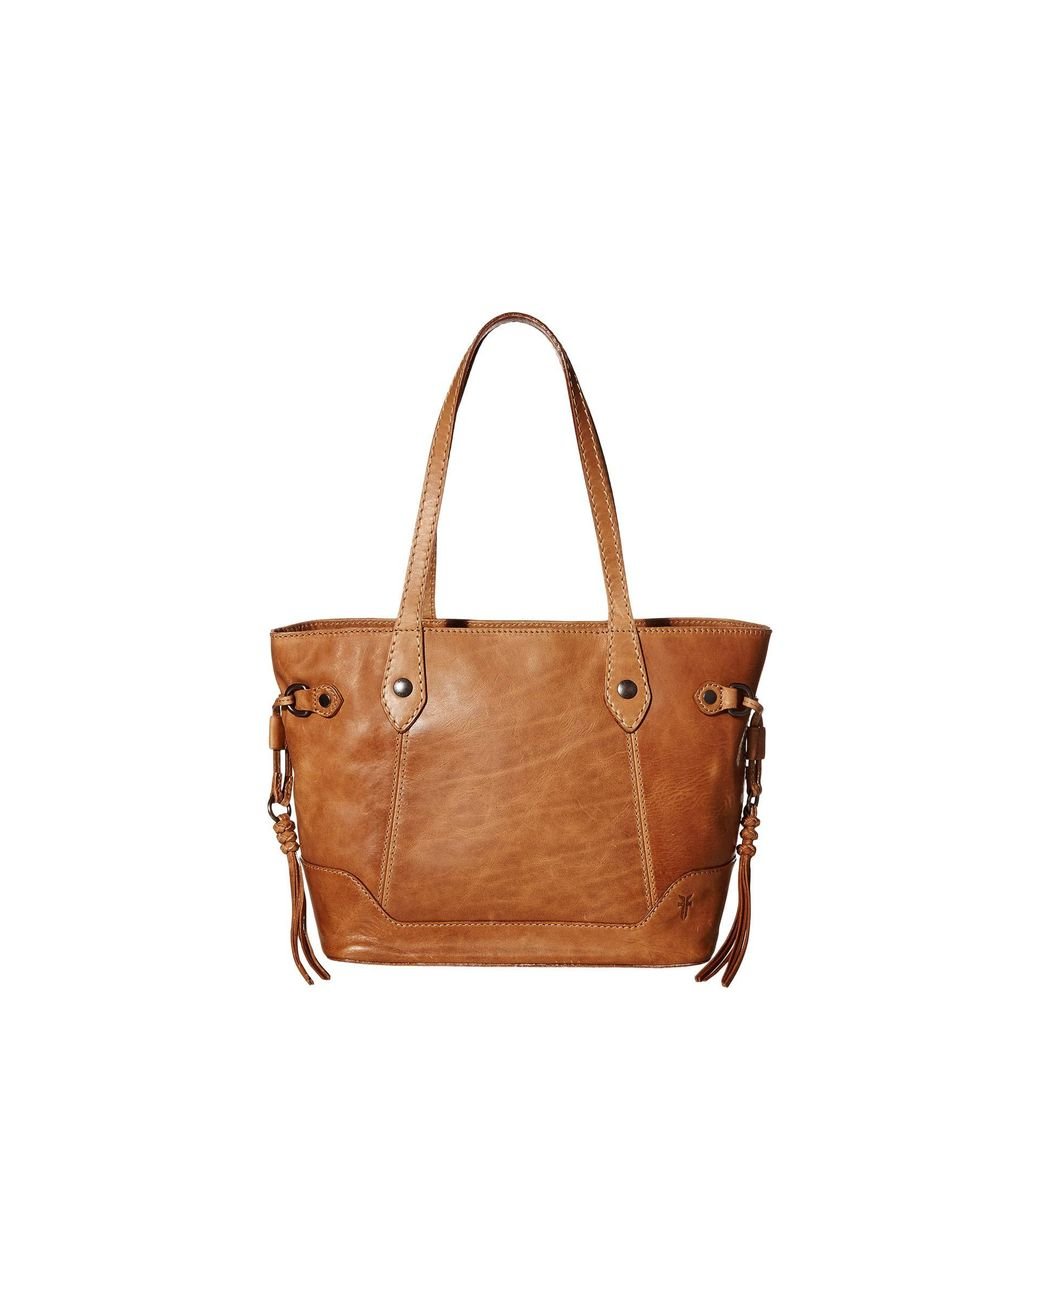 Frye Leather Melissa Carryall in Beige (Natural) - Lyst